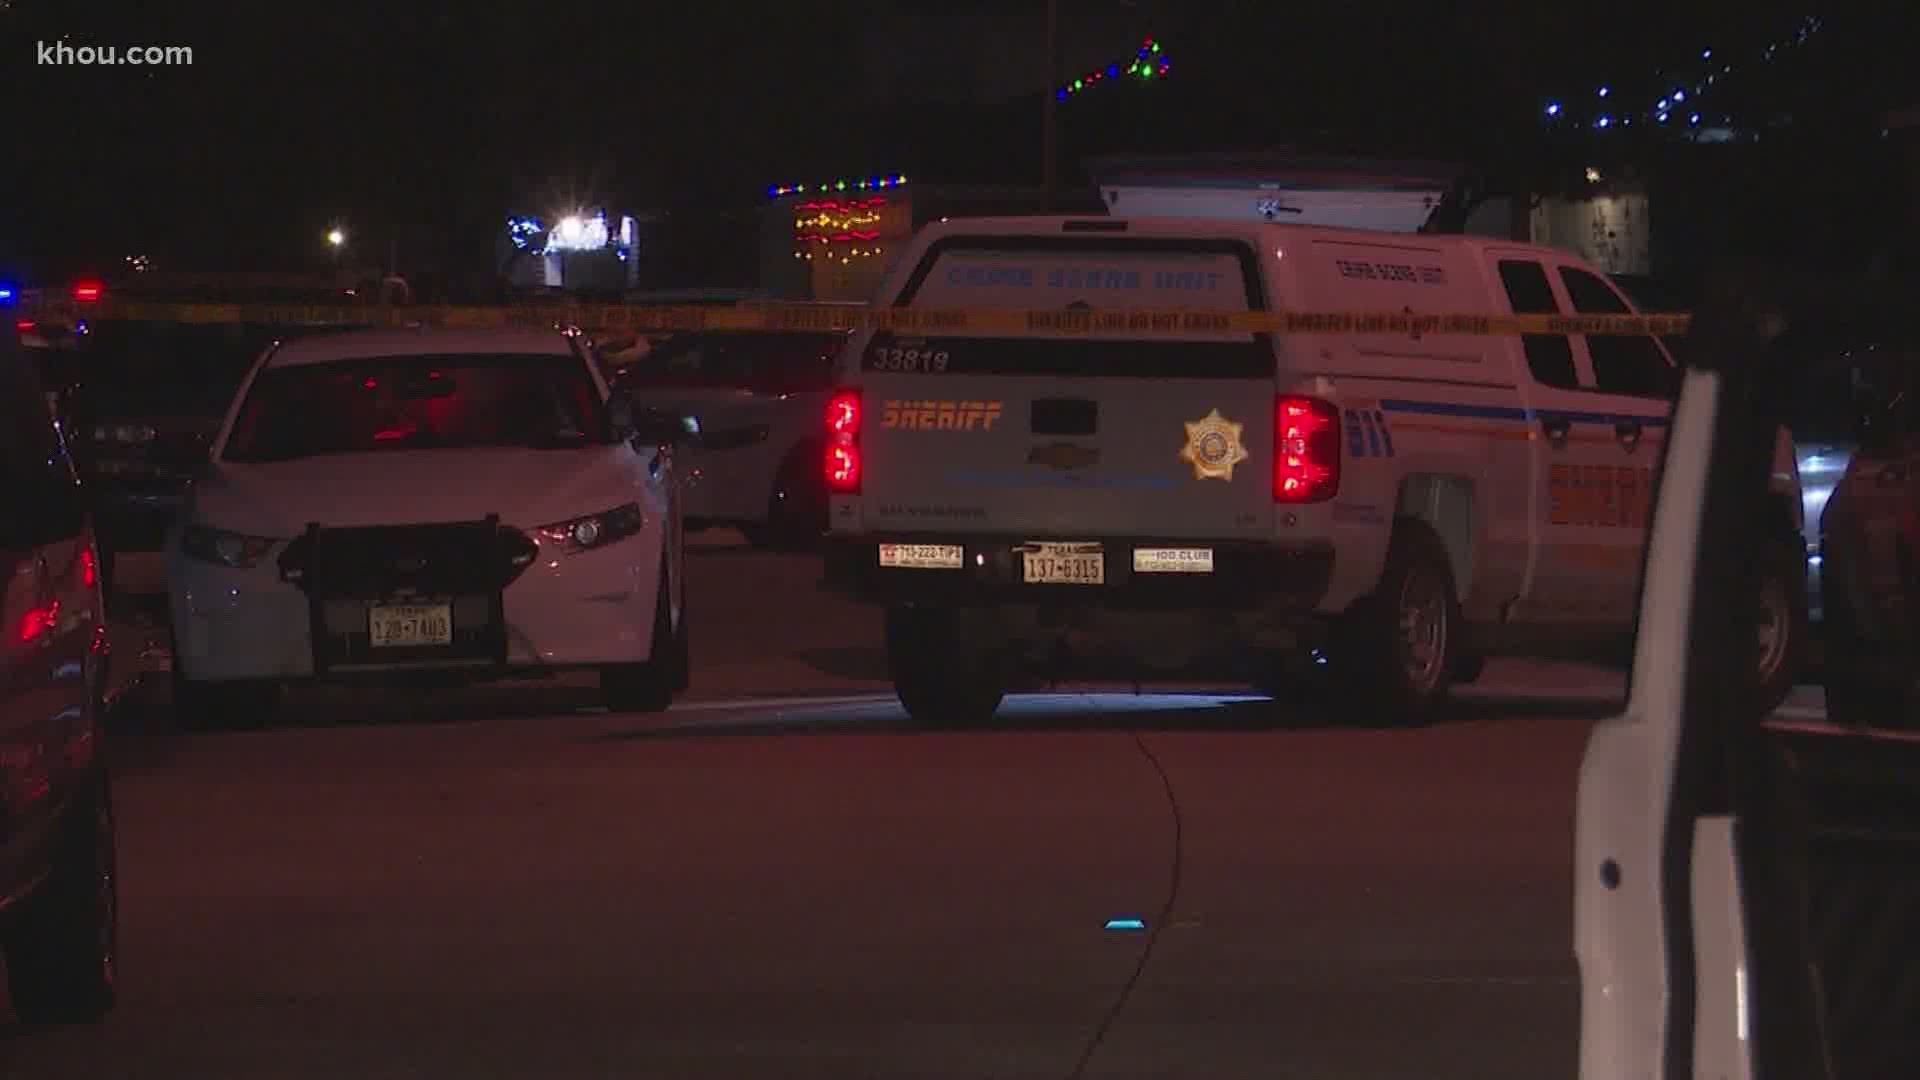 Harris County Sheriff’s deputies identified a 16-year-old who died Thursday night after a shooting in north Harris County.